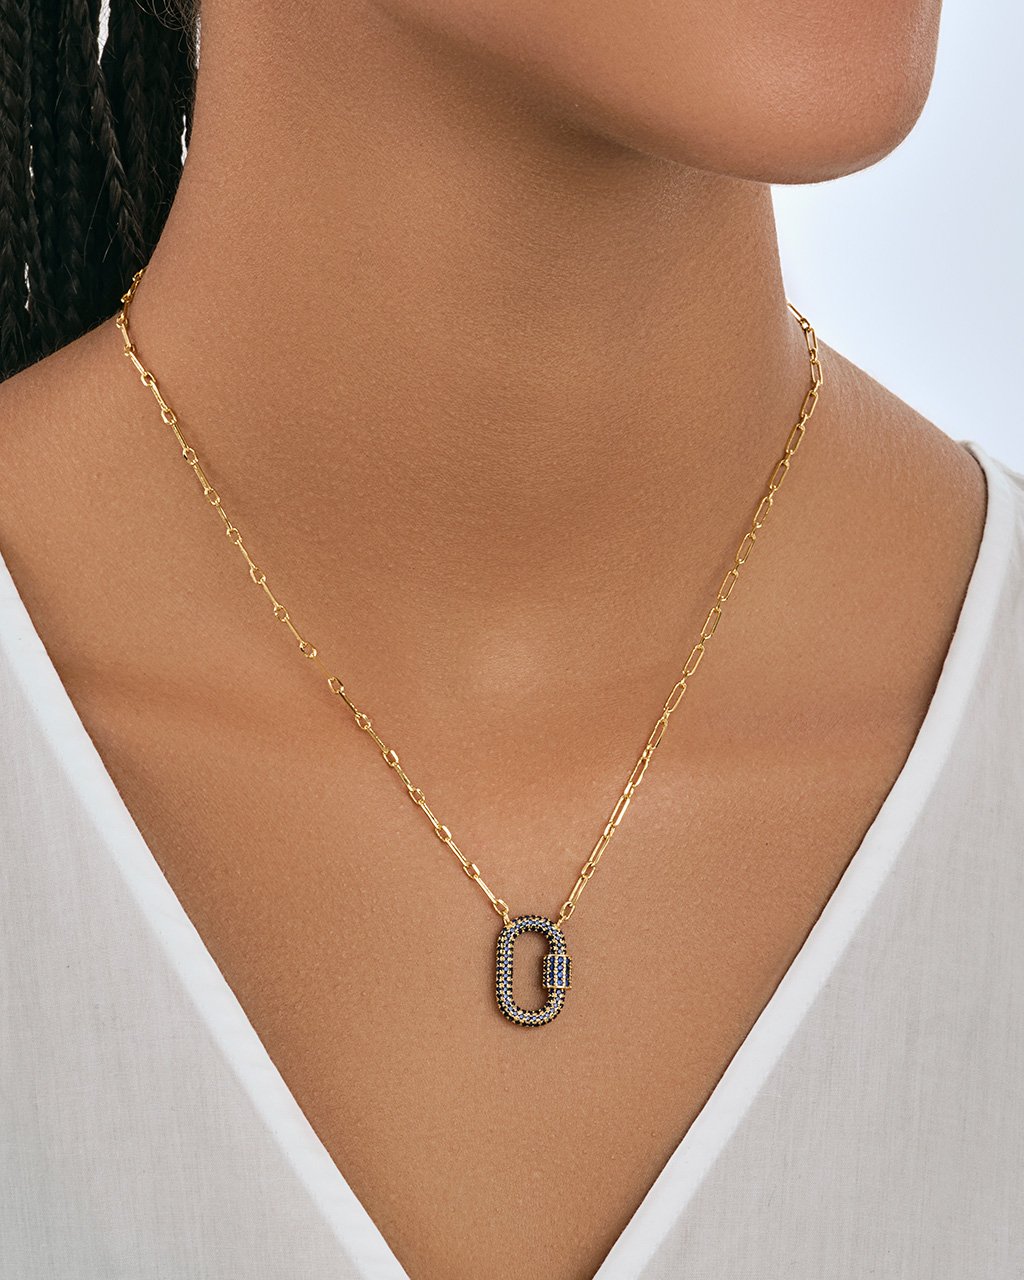 Engraved Initial Bike Lock Charm Necklace - Gold Vermeil